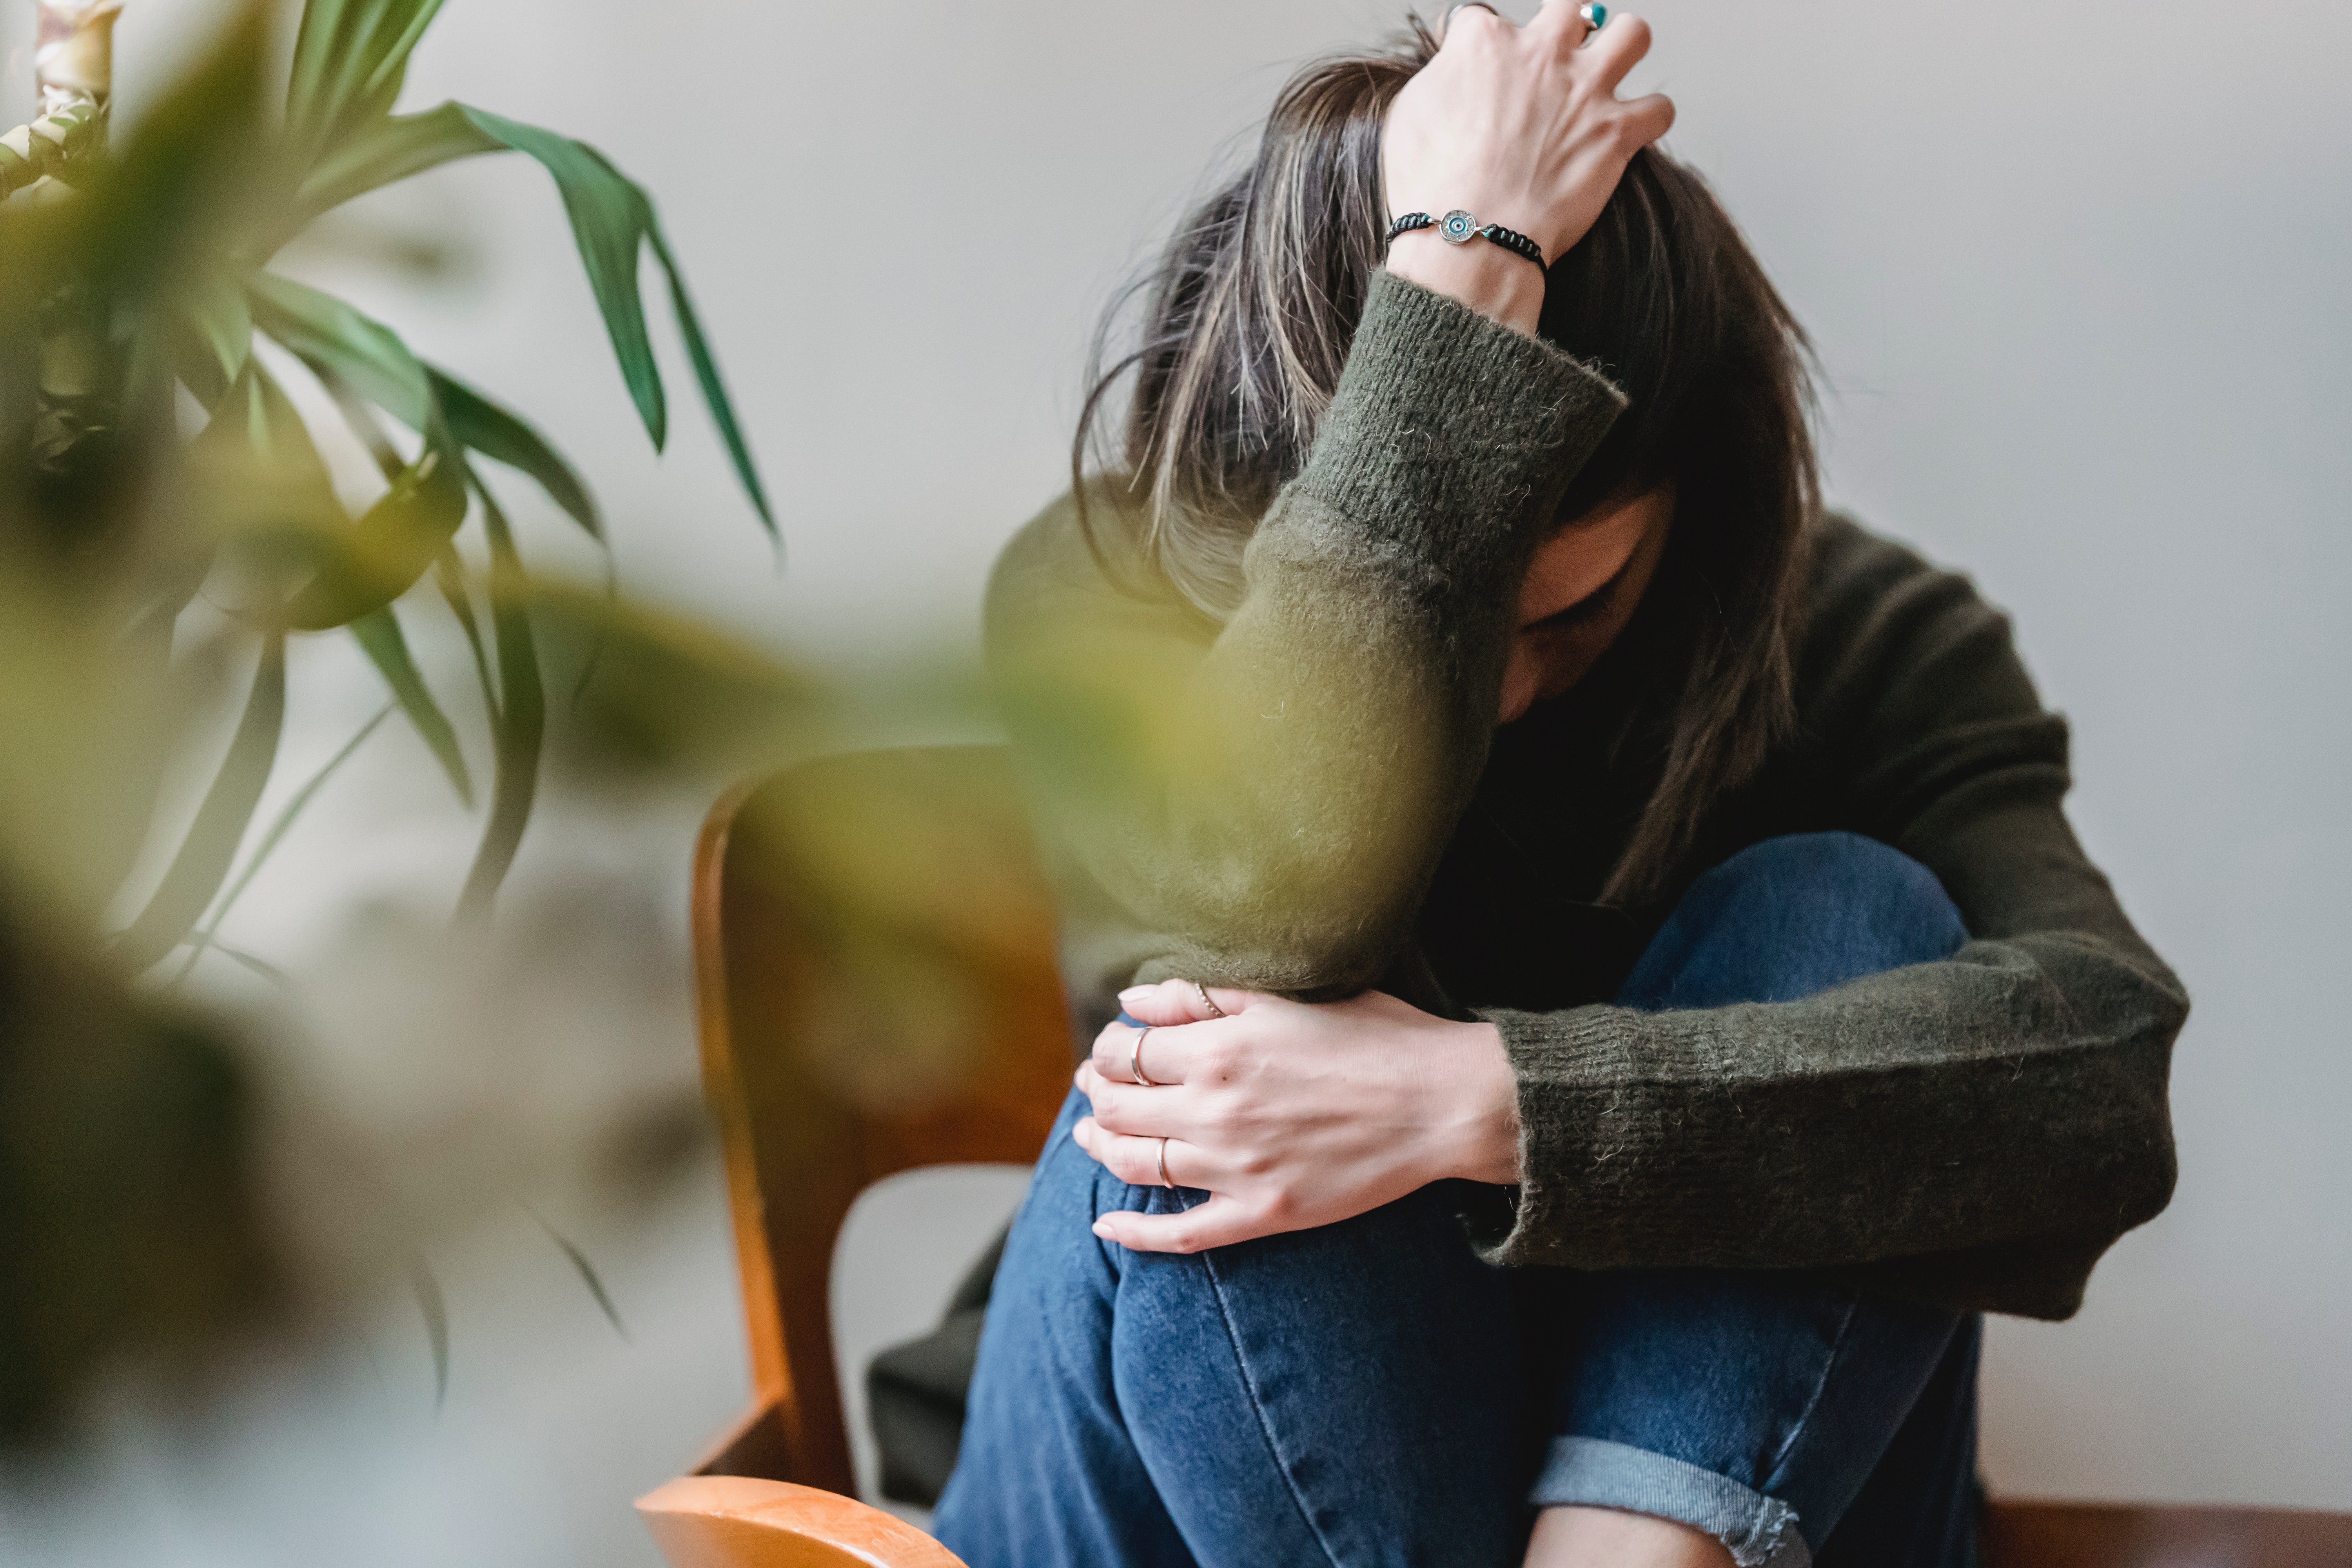 A dissapointed woman sitting in a chair | Source: Pexels